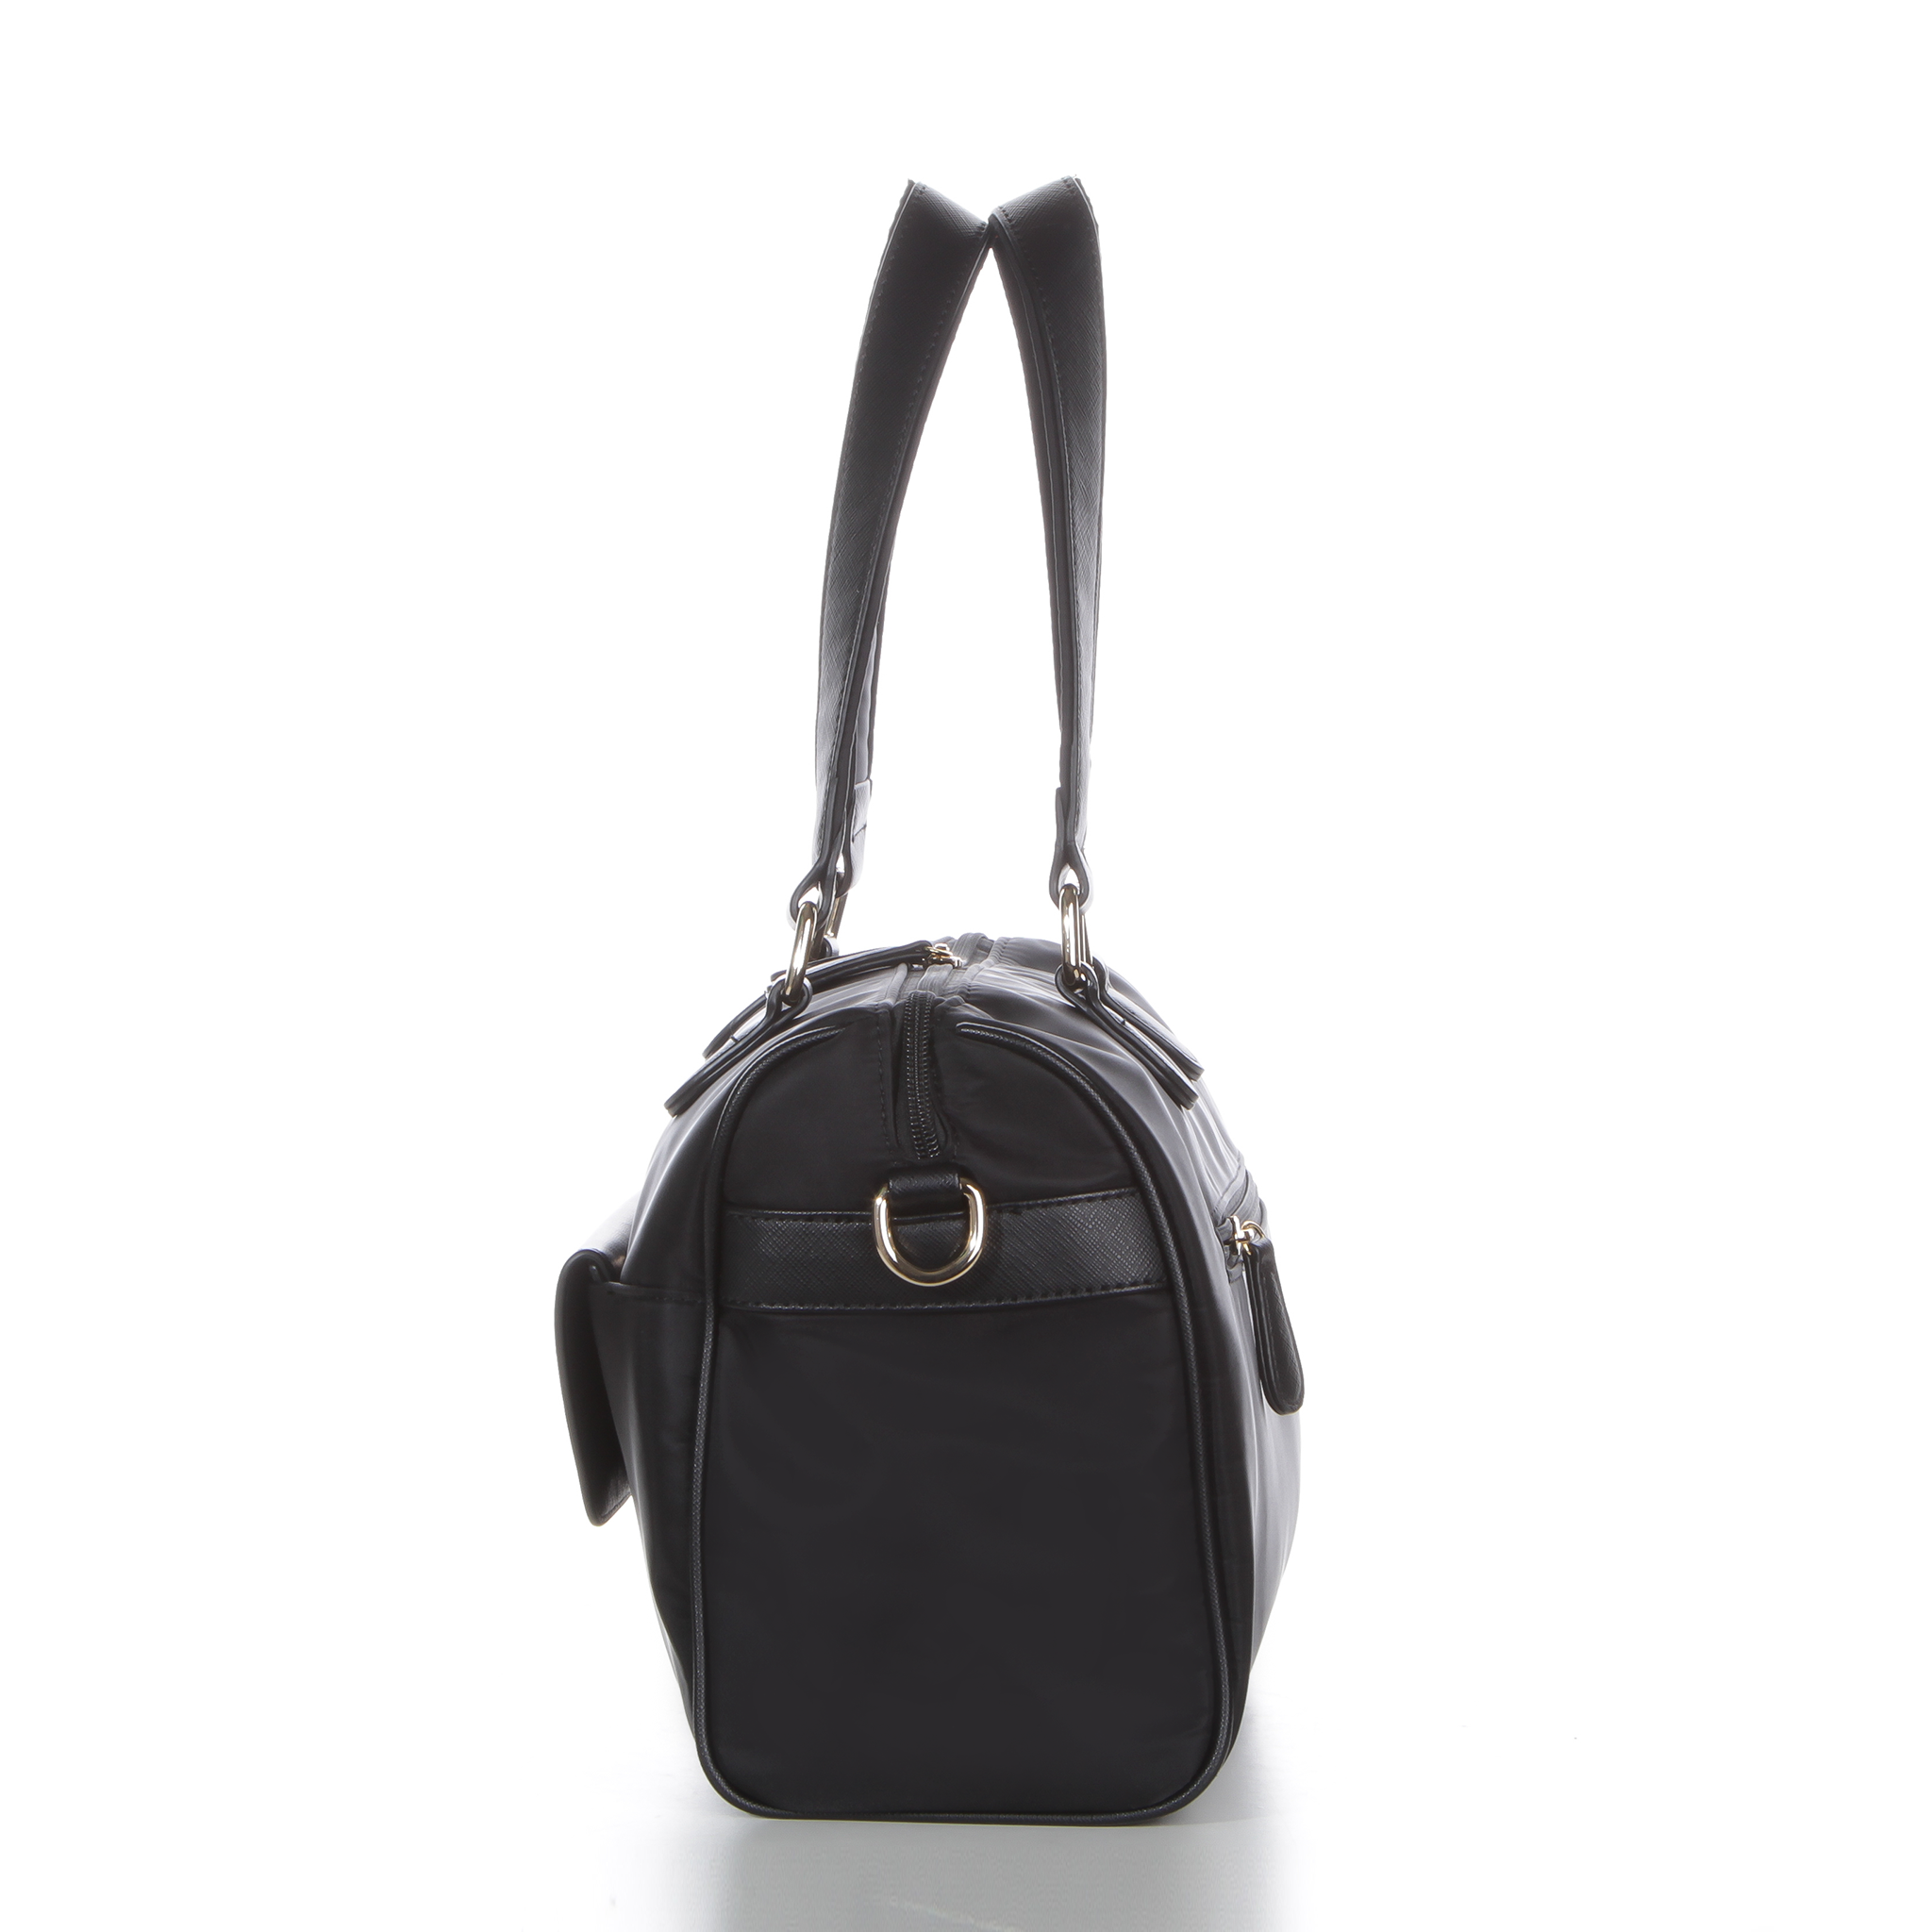 On the Go 3-in-1 Bag by DAZZ - Brilliant Black